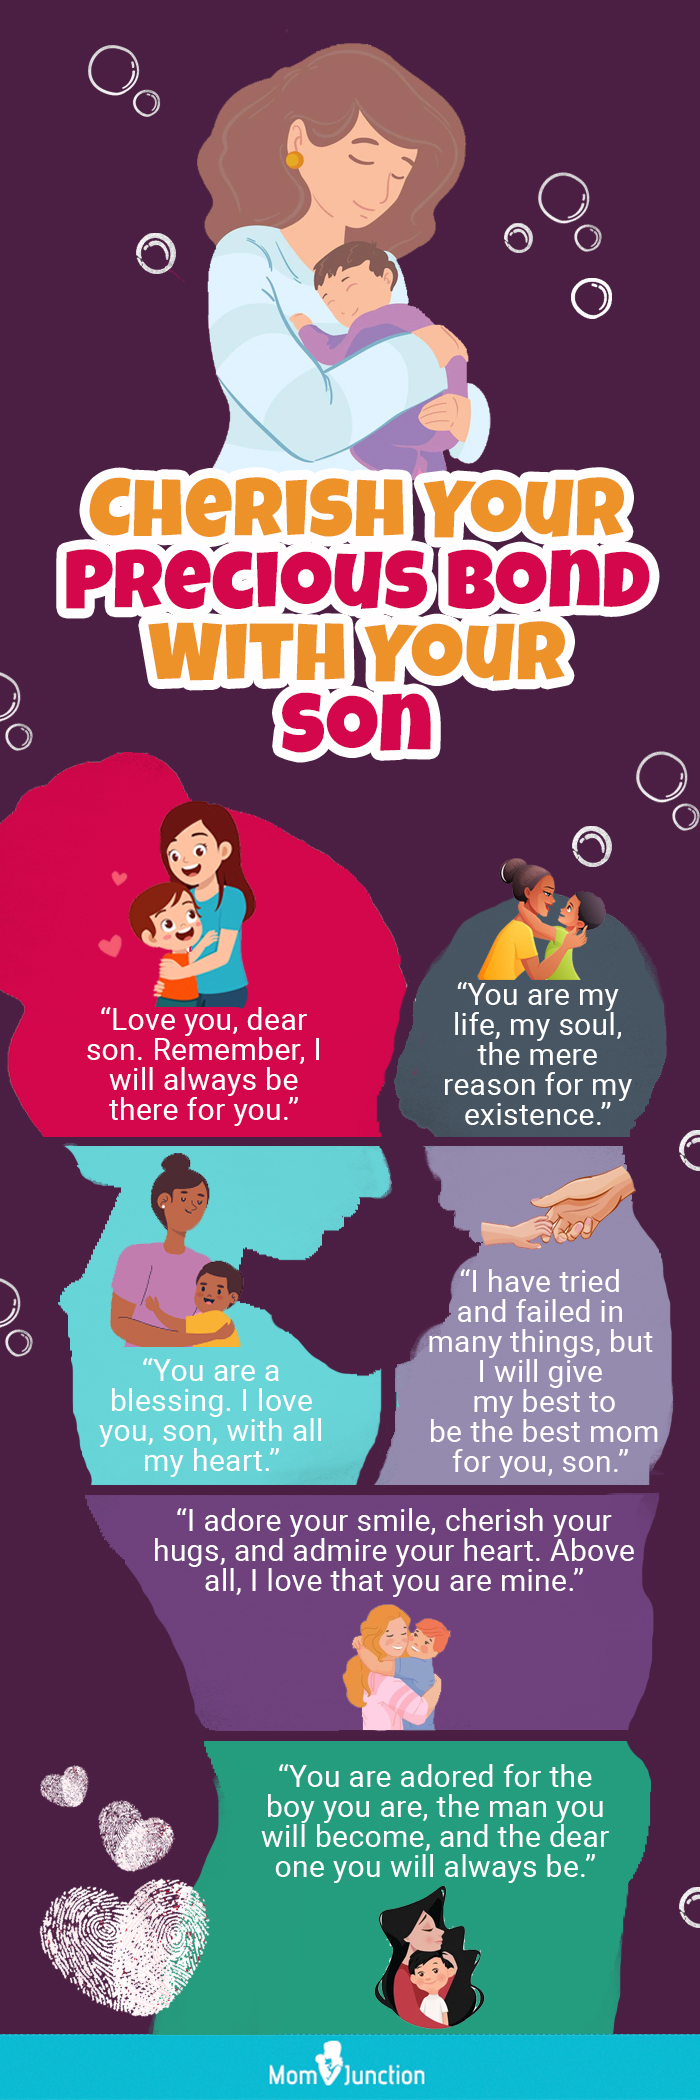 mother son quotes [infographic]